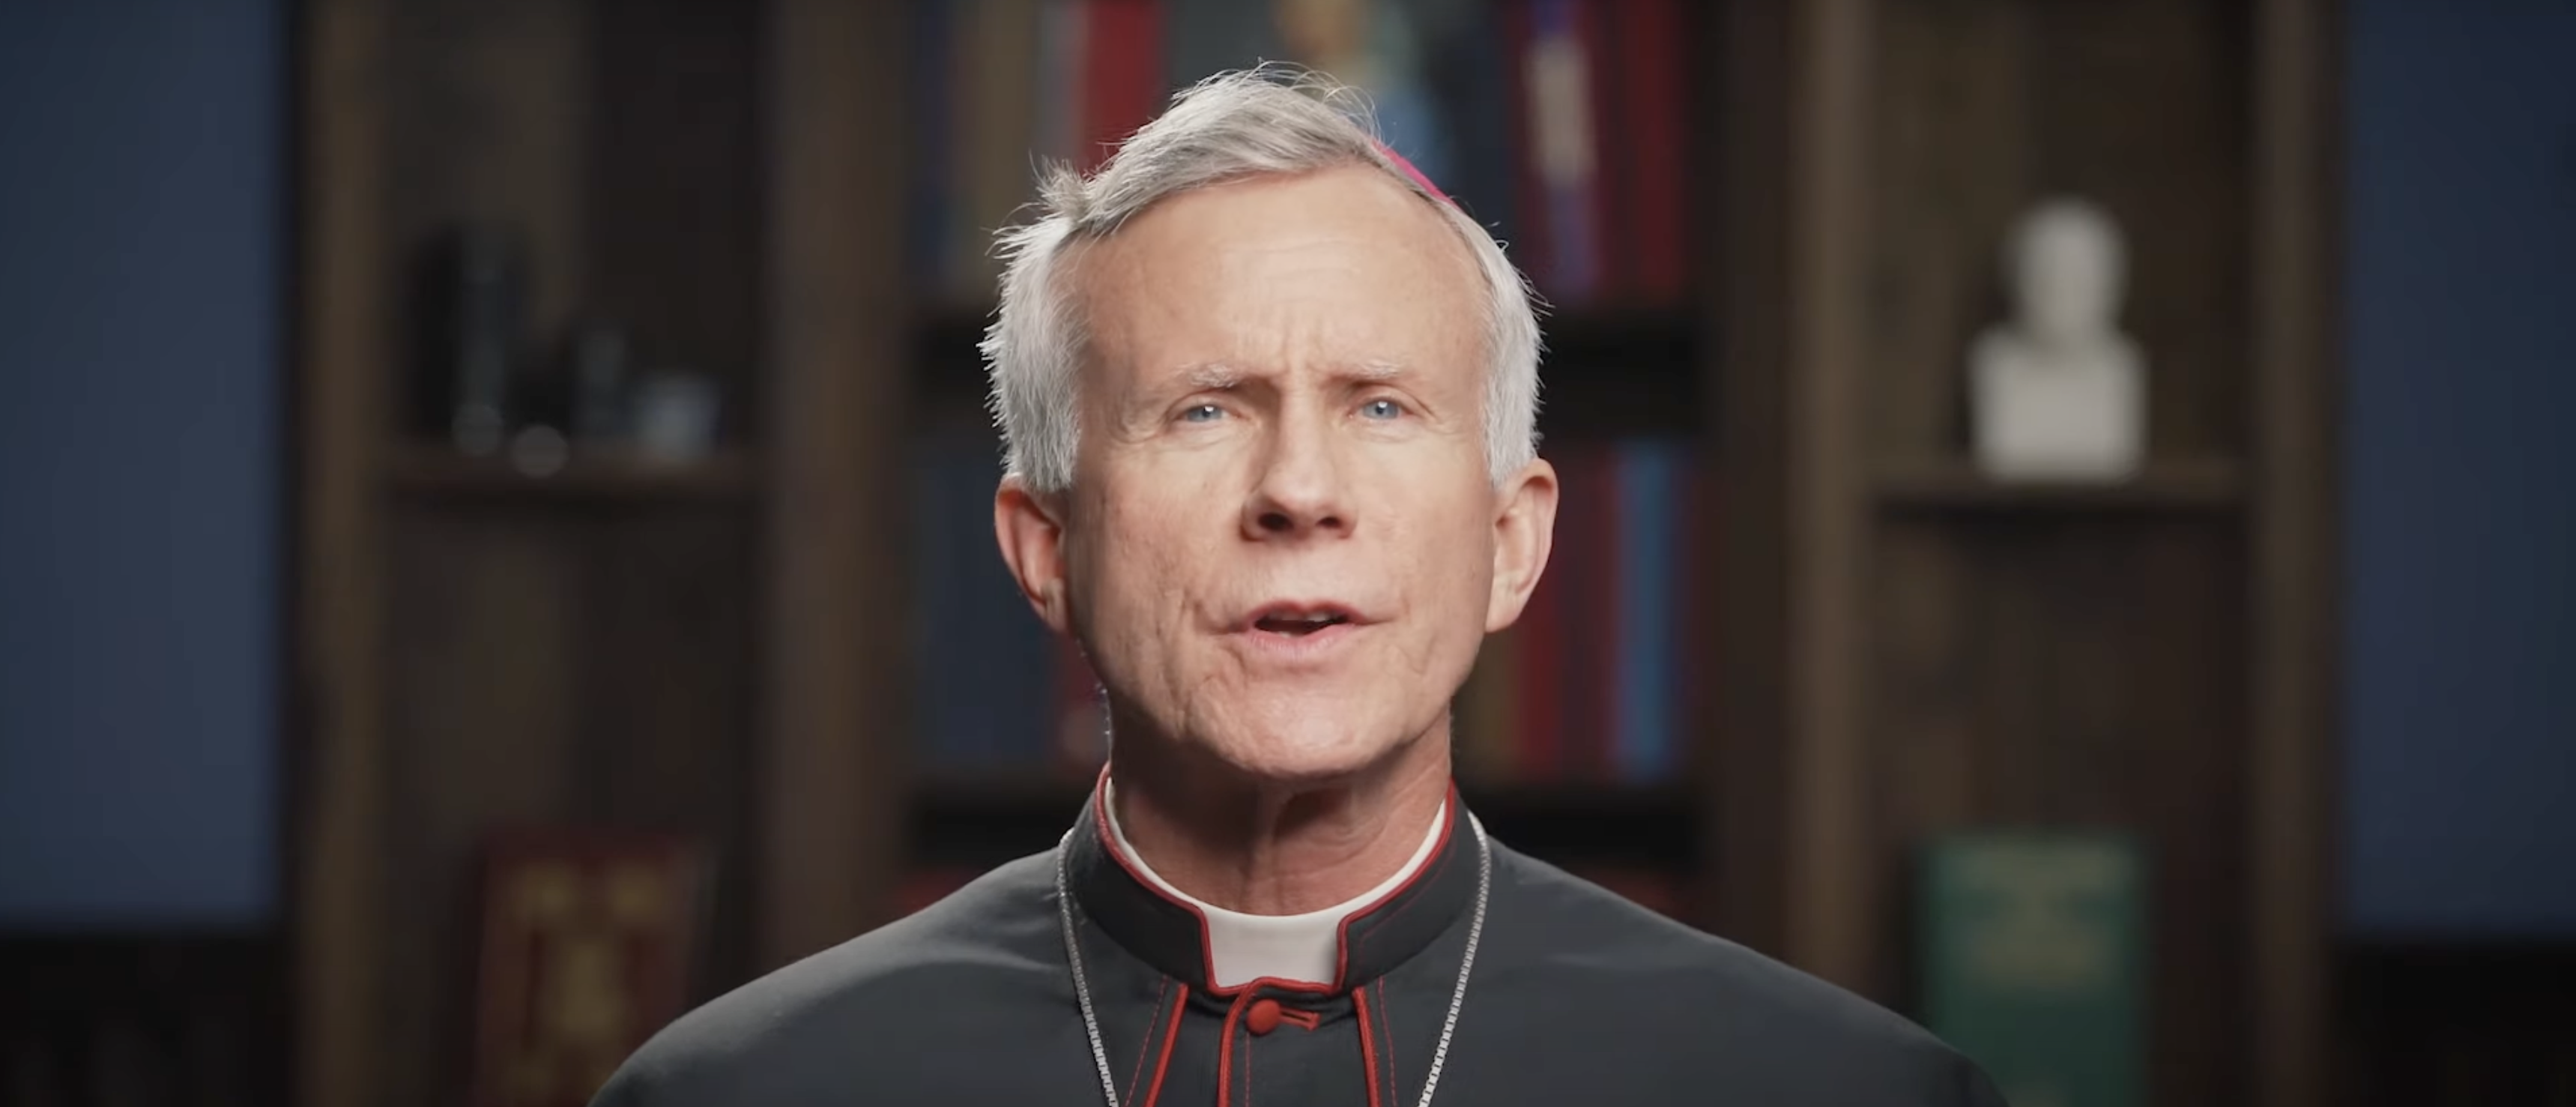 “Please Don’t Listen To This Evil Woman”: Catholic Bishop Warns About Hillary Clinton Following Abortion Comments